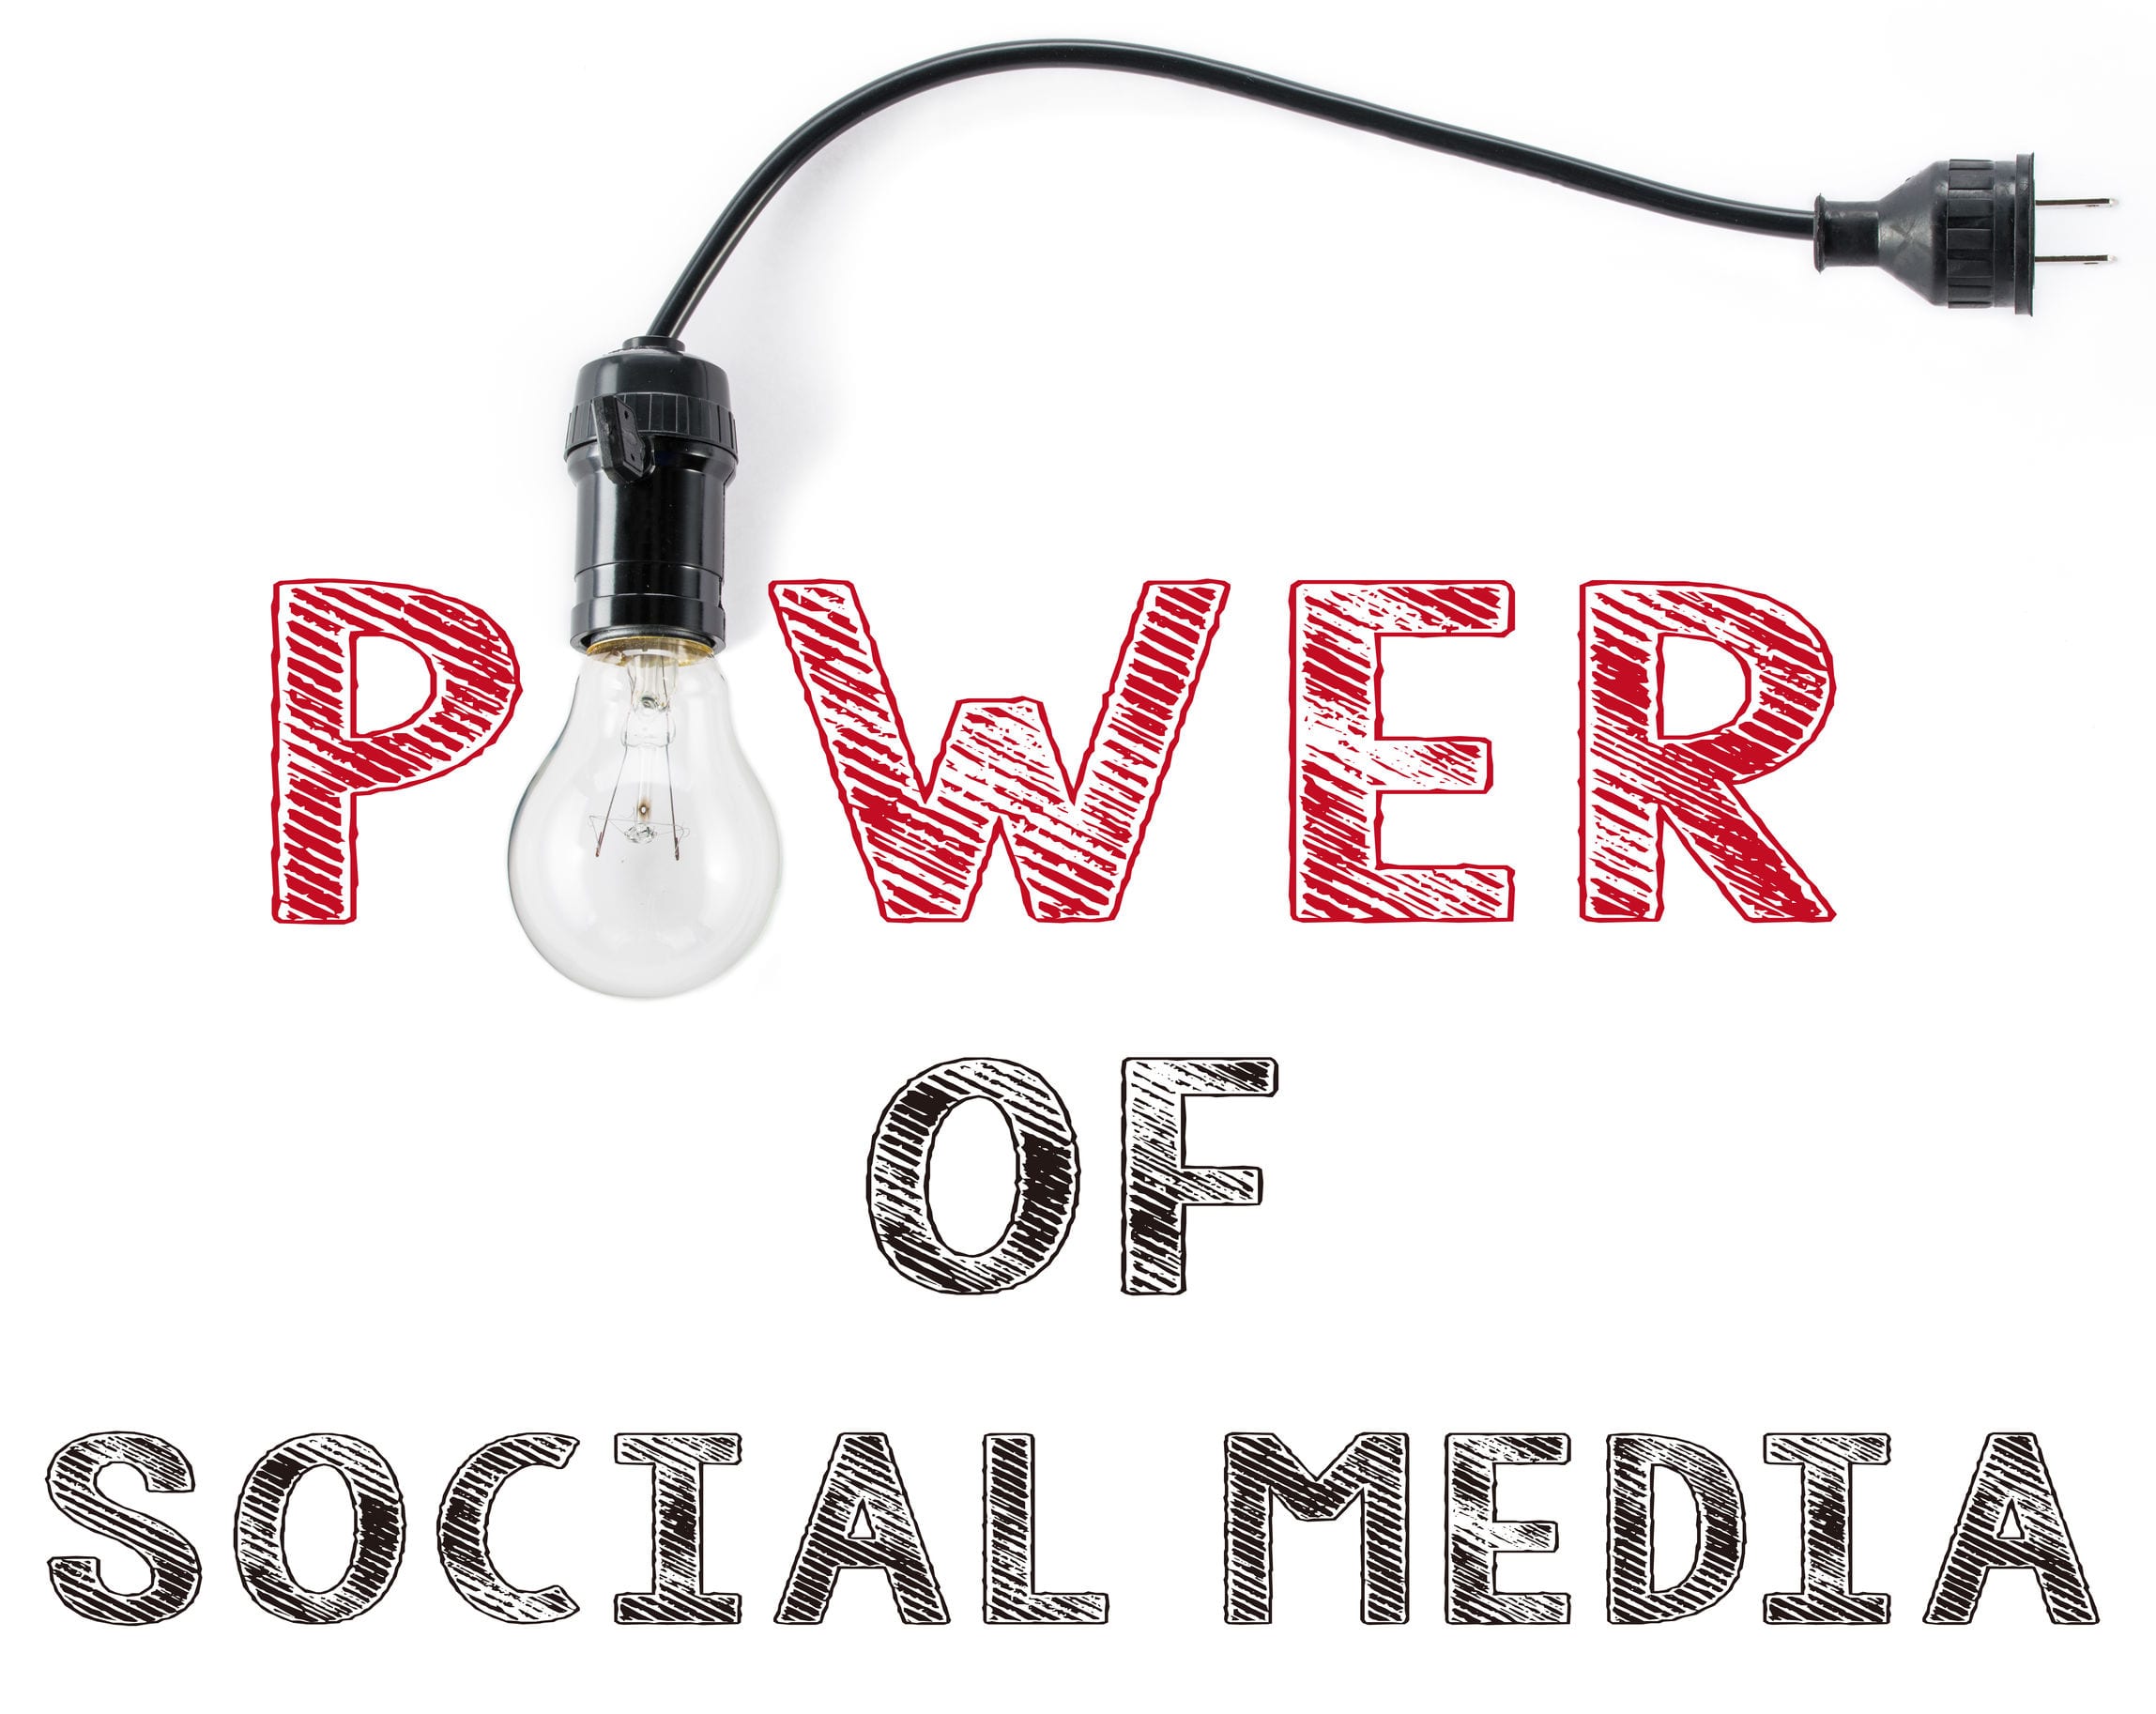 The power of social media marketing in fort worth